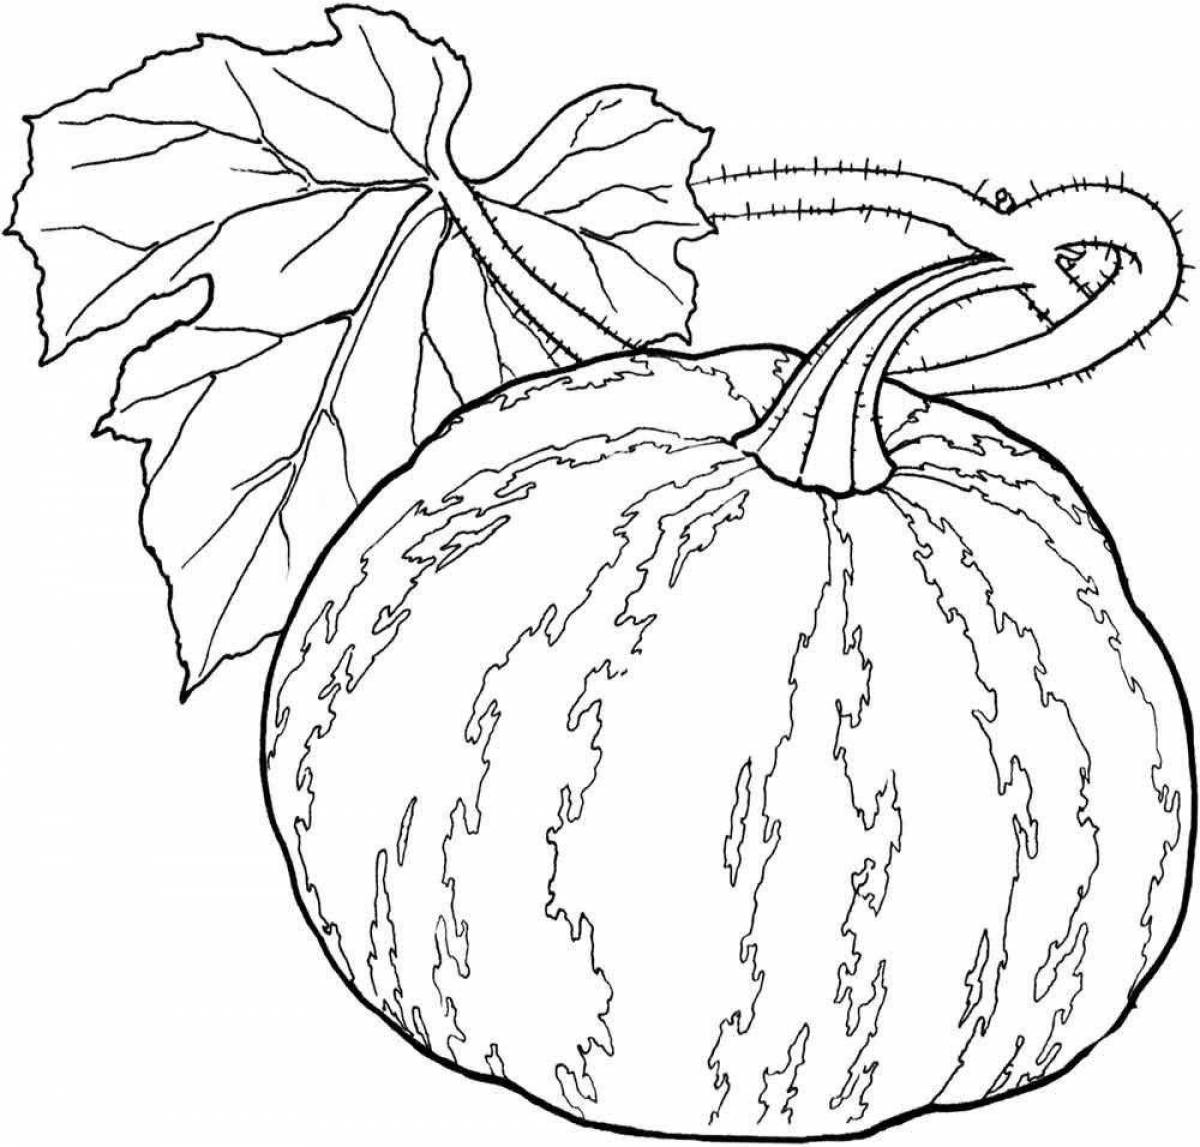 Playful vegetable and fruit coloring page